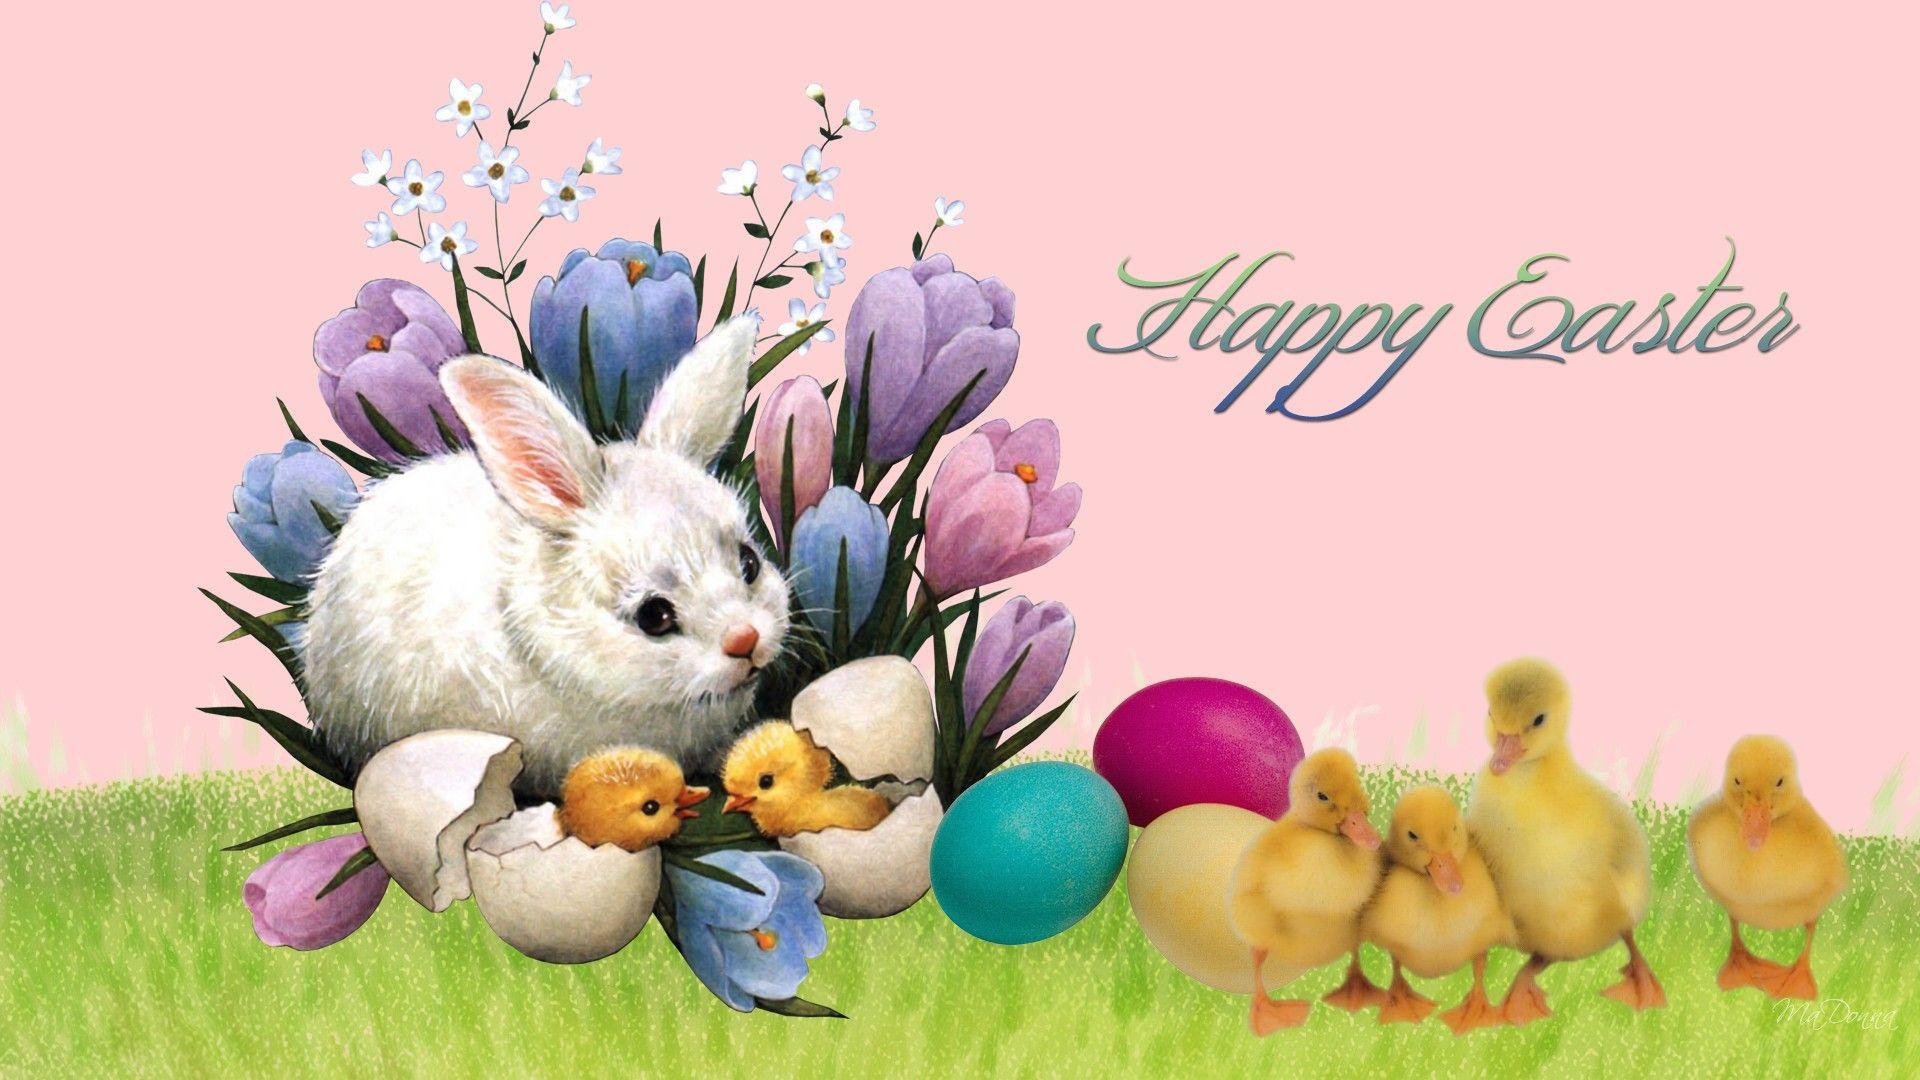 free wallpaper easter bunny rabbits. Easter Bunny Friends